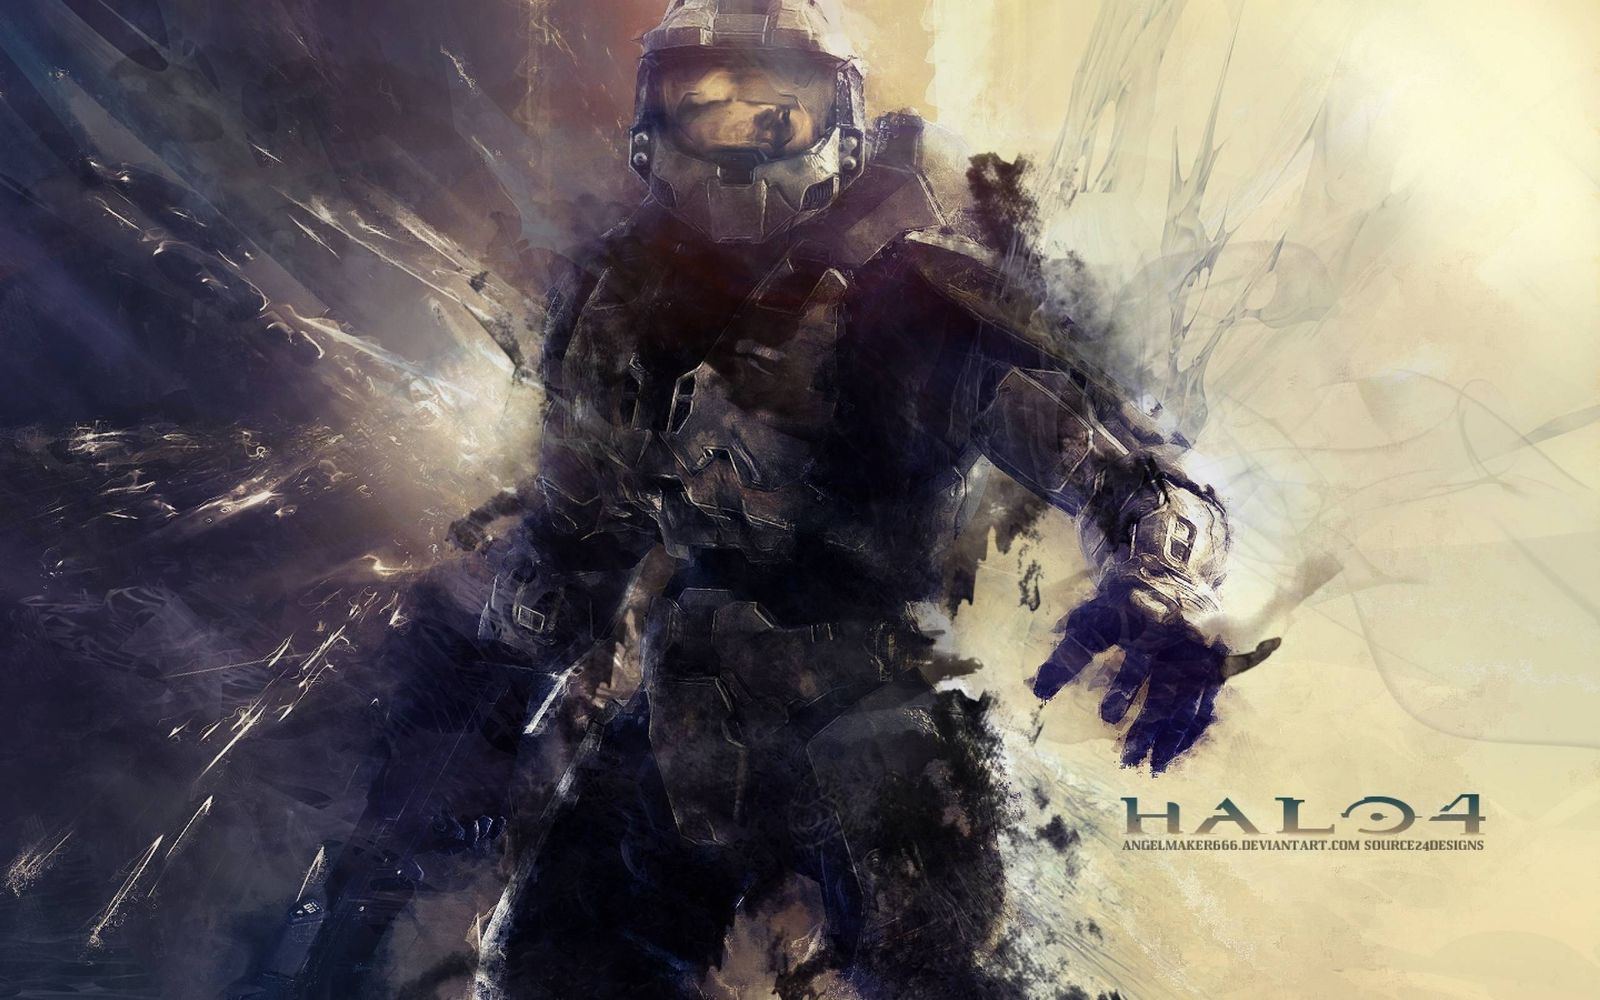 High Definition Halo Wallpaper For Every Screen